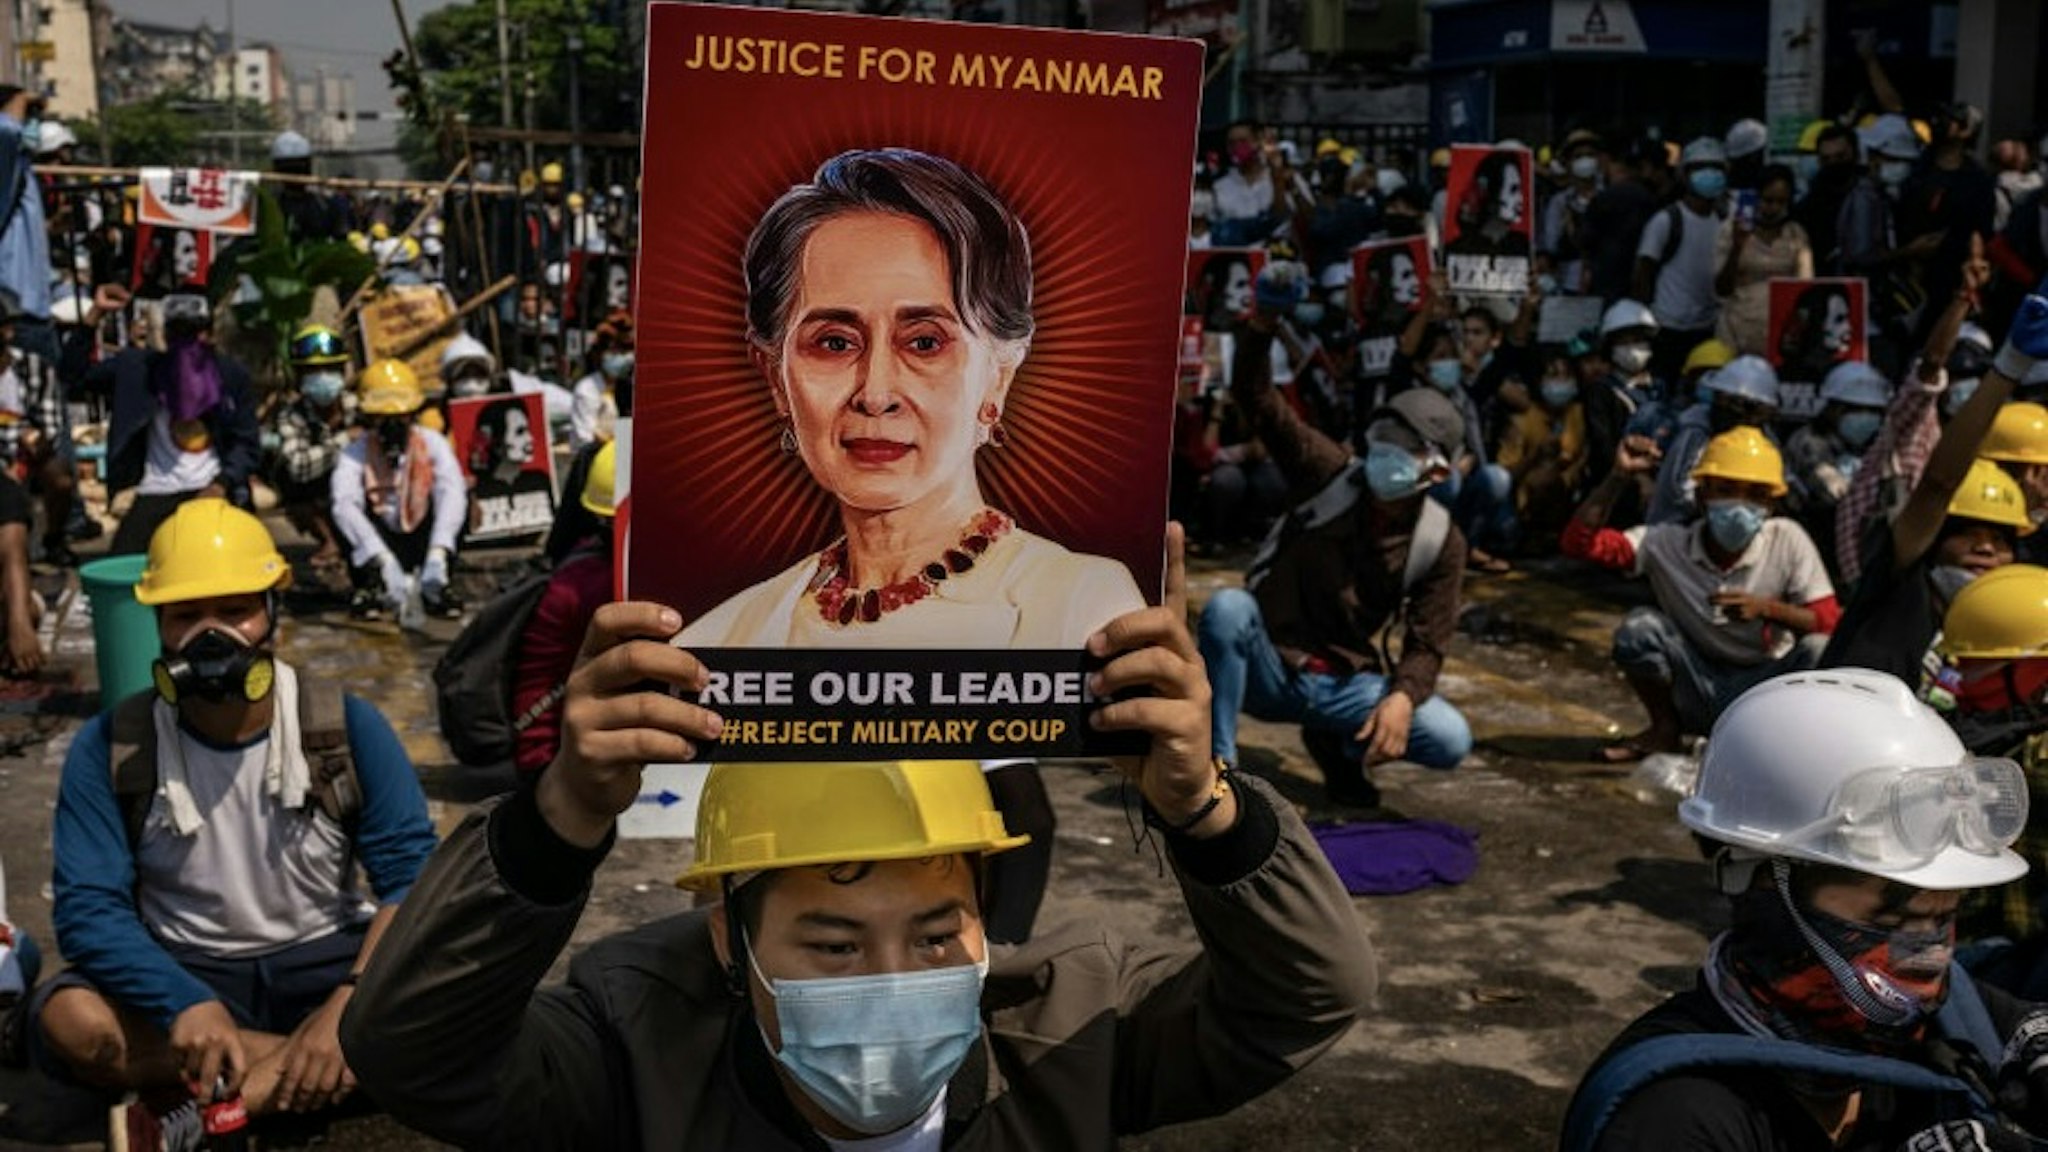 Riot Police Crack Down On Anti-coup Protesters YANGON, MYANMAR - MARCH 02: An anti-coup protester holds up a placard featuring de-facto leader Aung San Suu Kyi on March 02, 2021 in Yangon, Myanmar. Myanmar's military government has intensified a crackdown on protesters in recent days, using tear gas and live ammunition, charging at and arresting protesters and journalists. At least 18 people have been killed so far, according to monitoring organizations. (Photo by Hkun Lat/Getty Images) Hkun Lat / Stringer